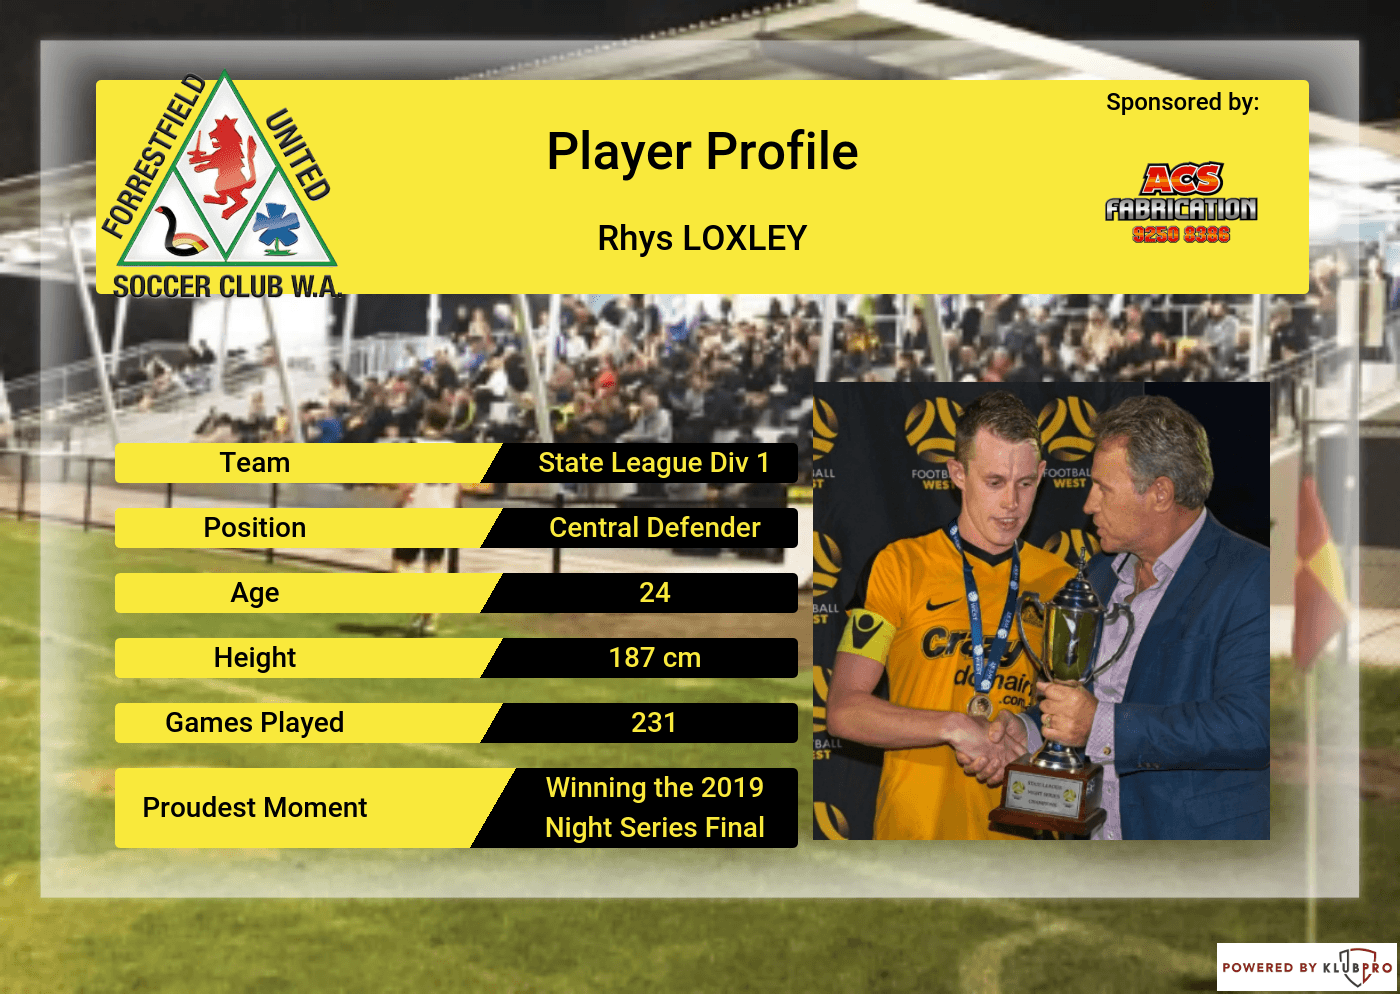 Forrestfield United Soccer Club-player-achievement-R LOXLEY-1552364646590 (1).png